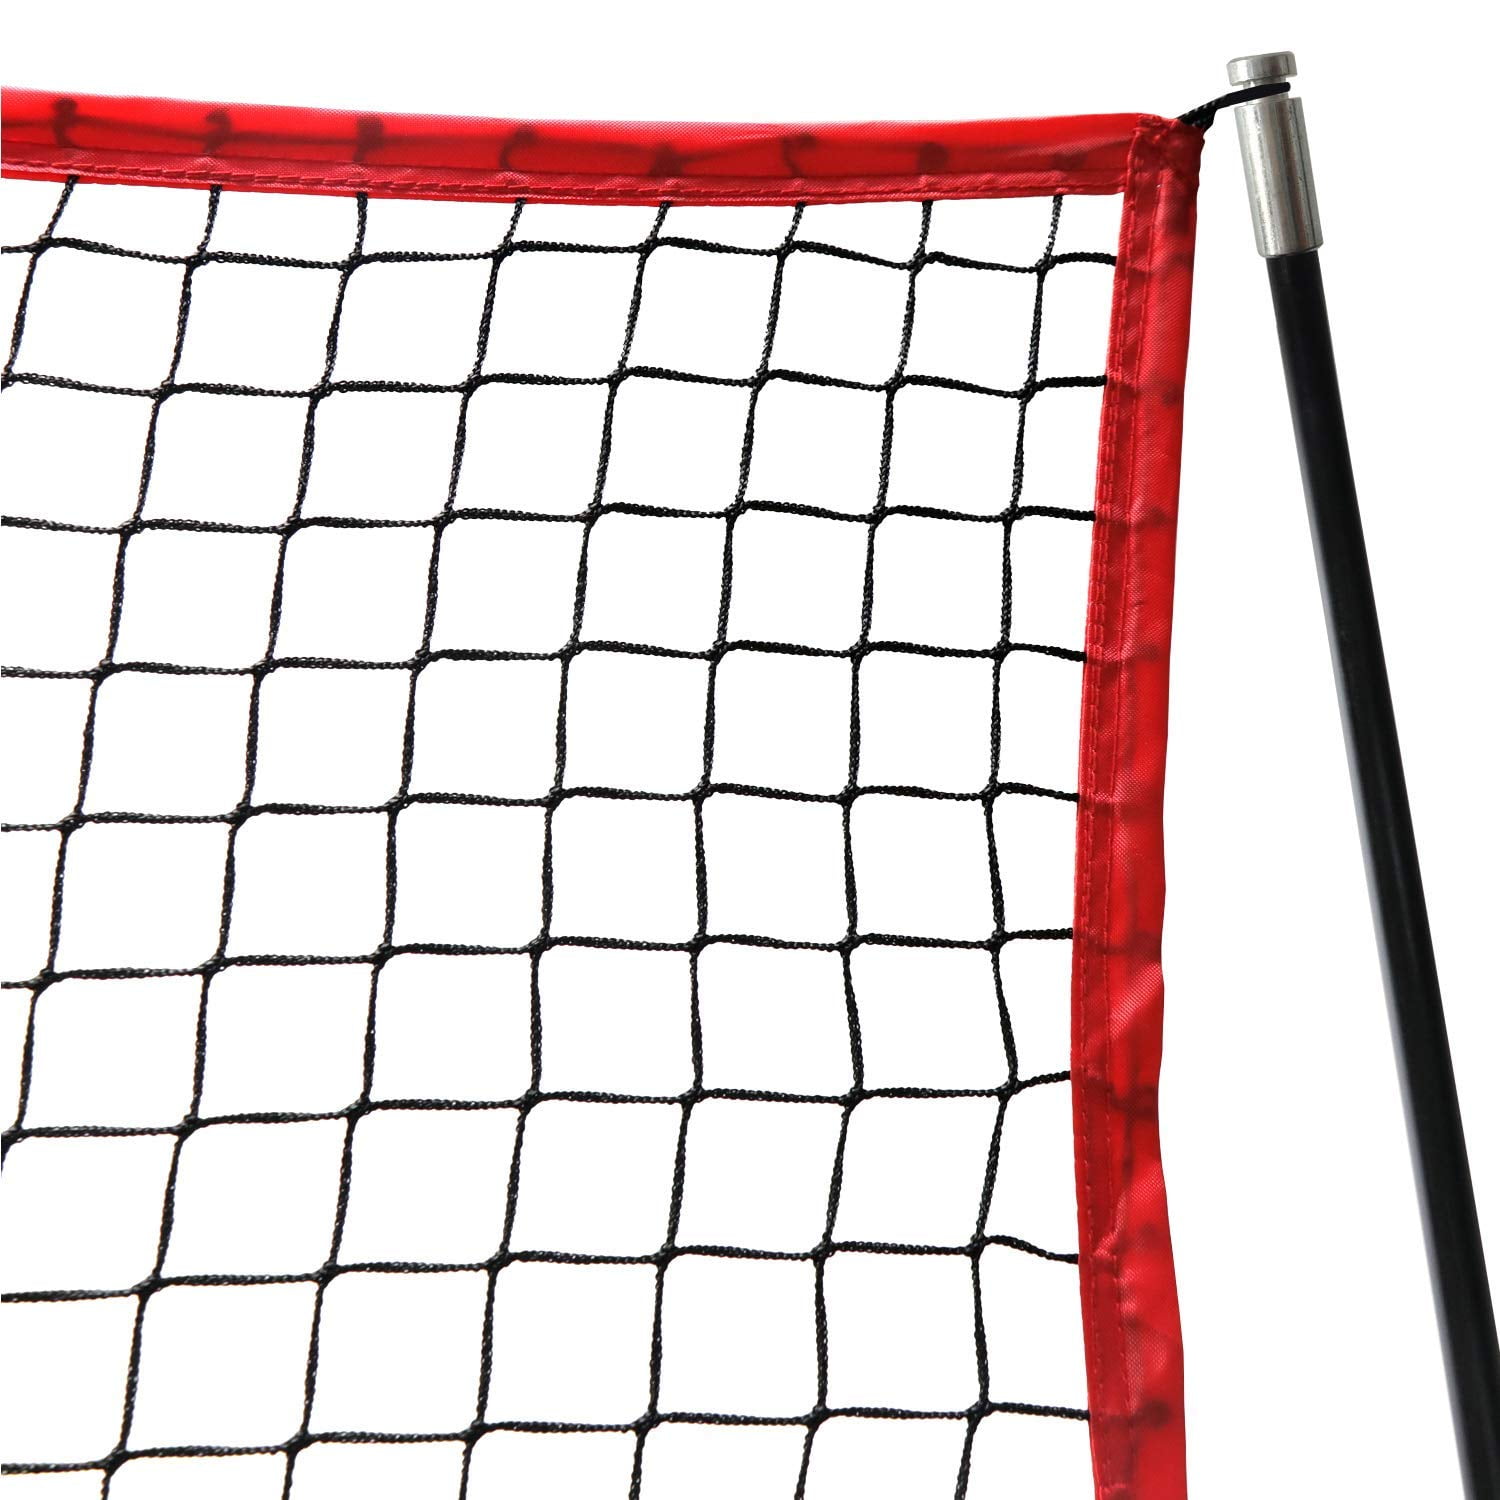 5 X 5' Portable Practice Baseball Net For Hitting Pitching Batting Catching Zone 